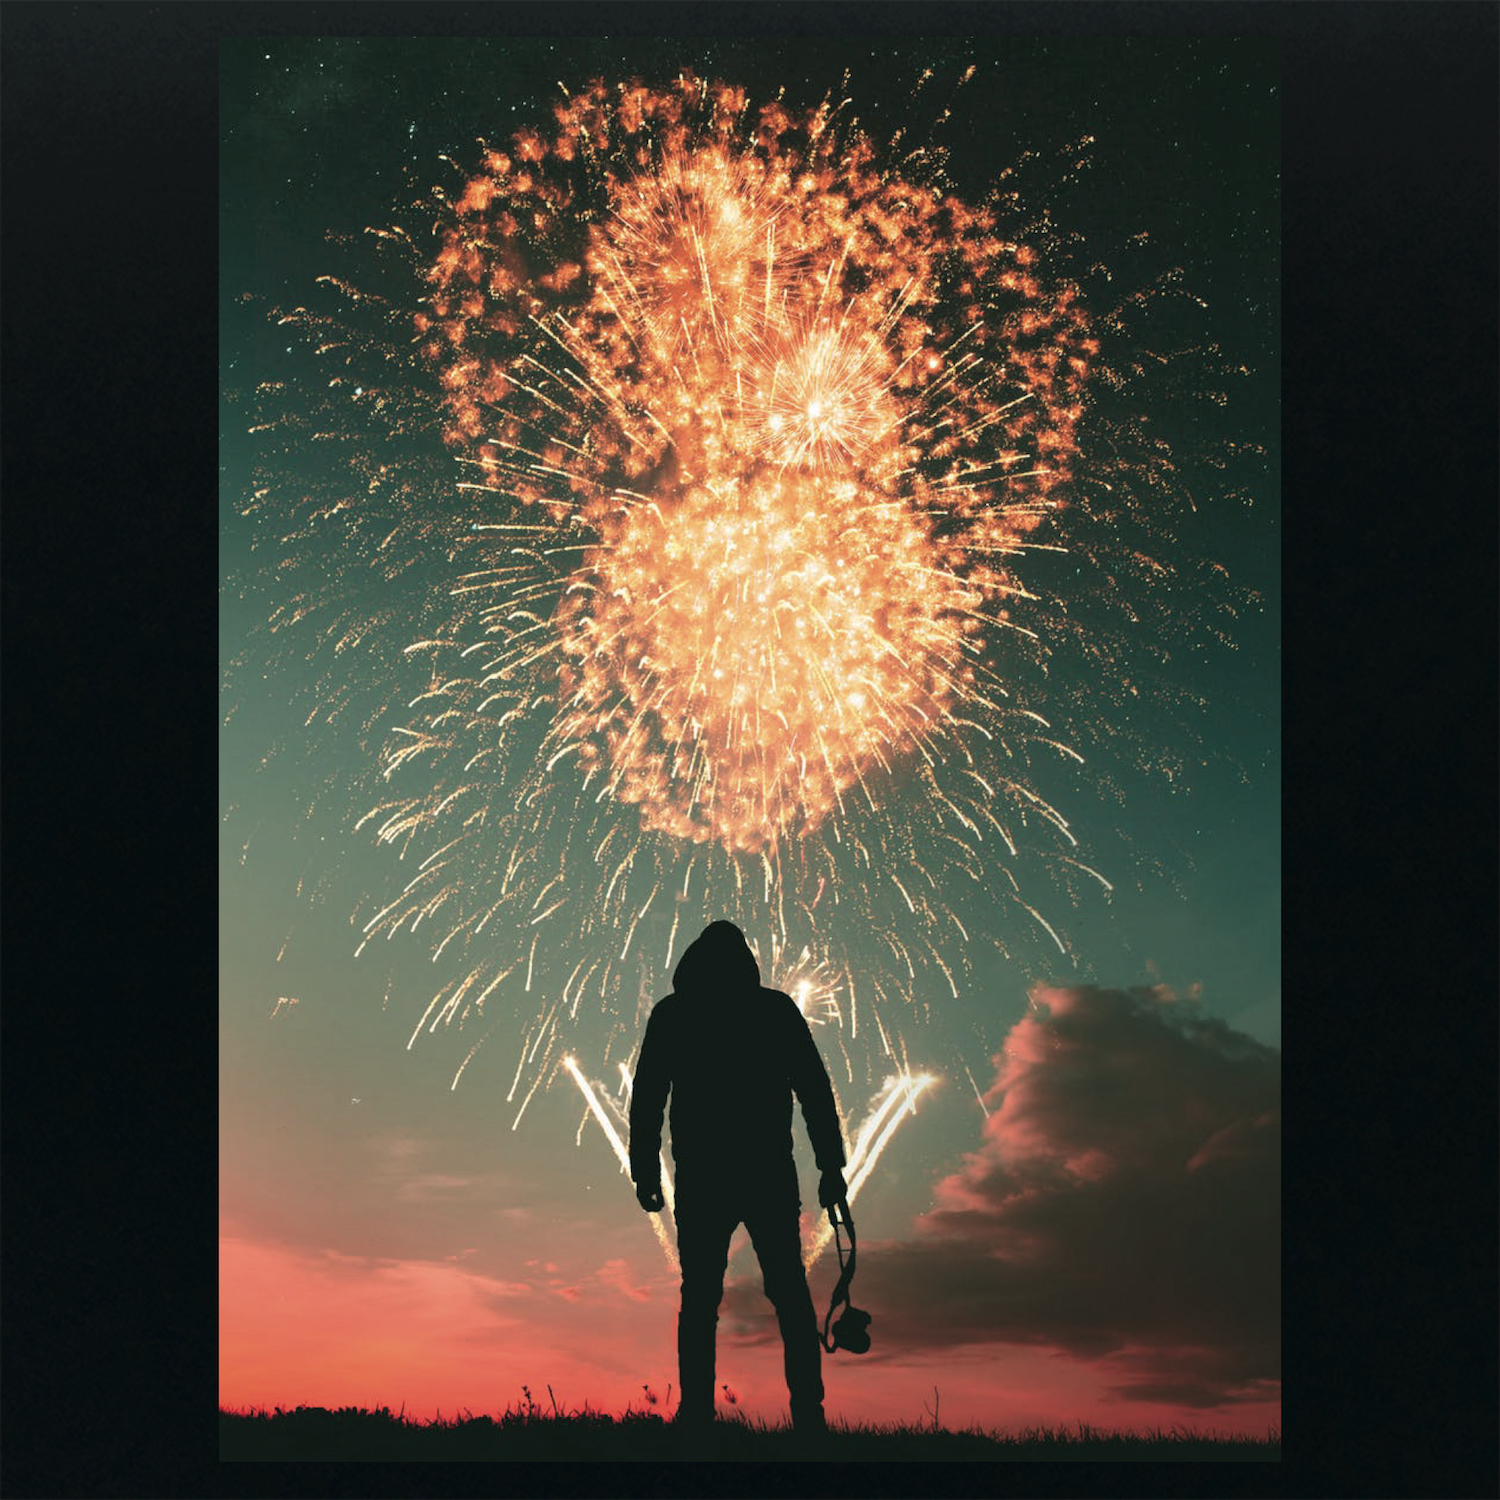 Man with camera in front of Fireworks - Print on Dibond